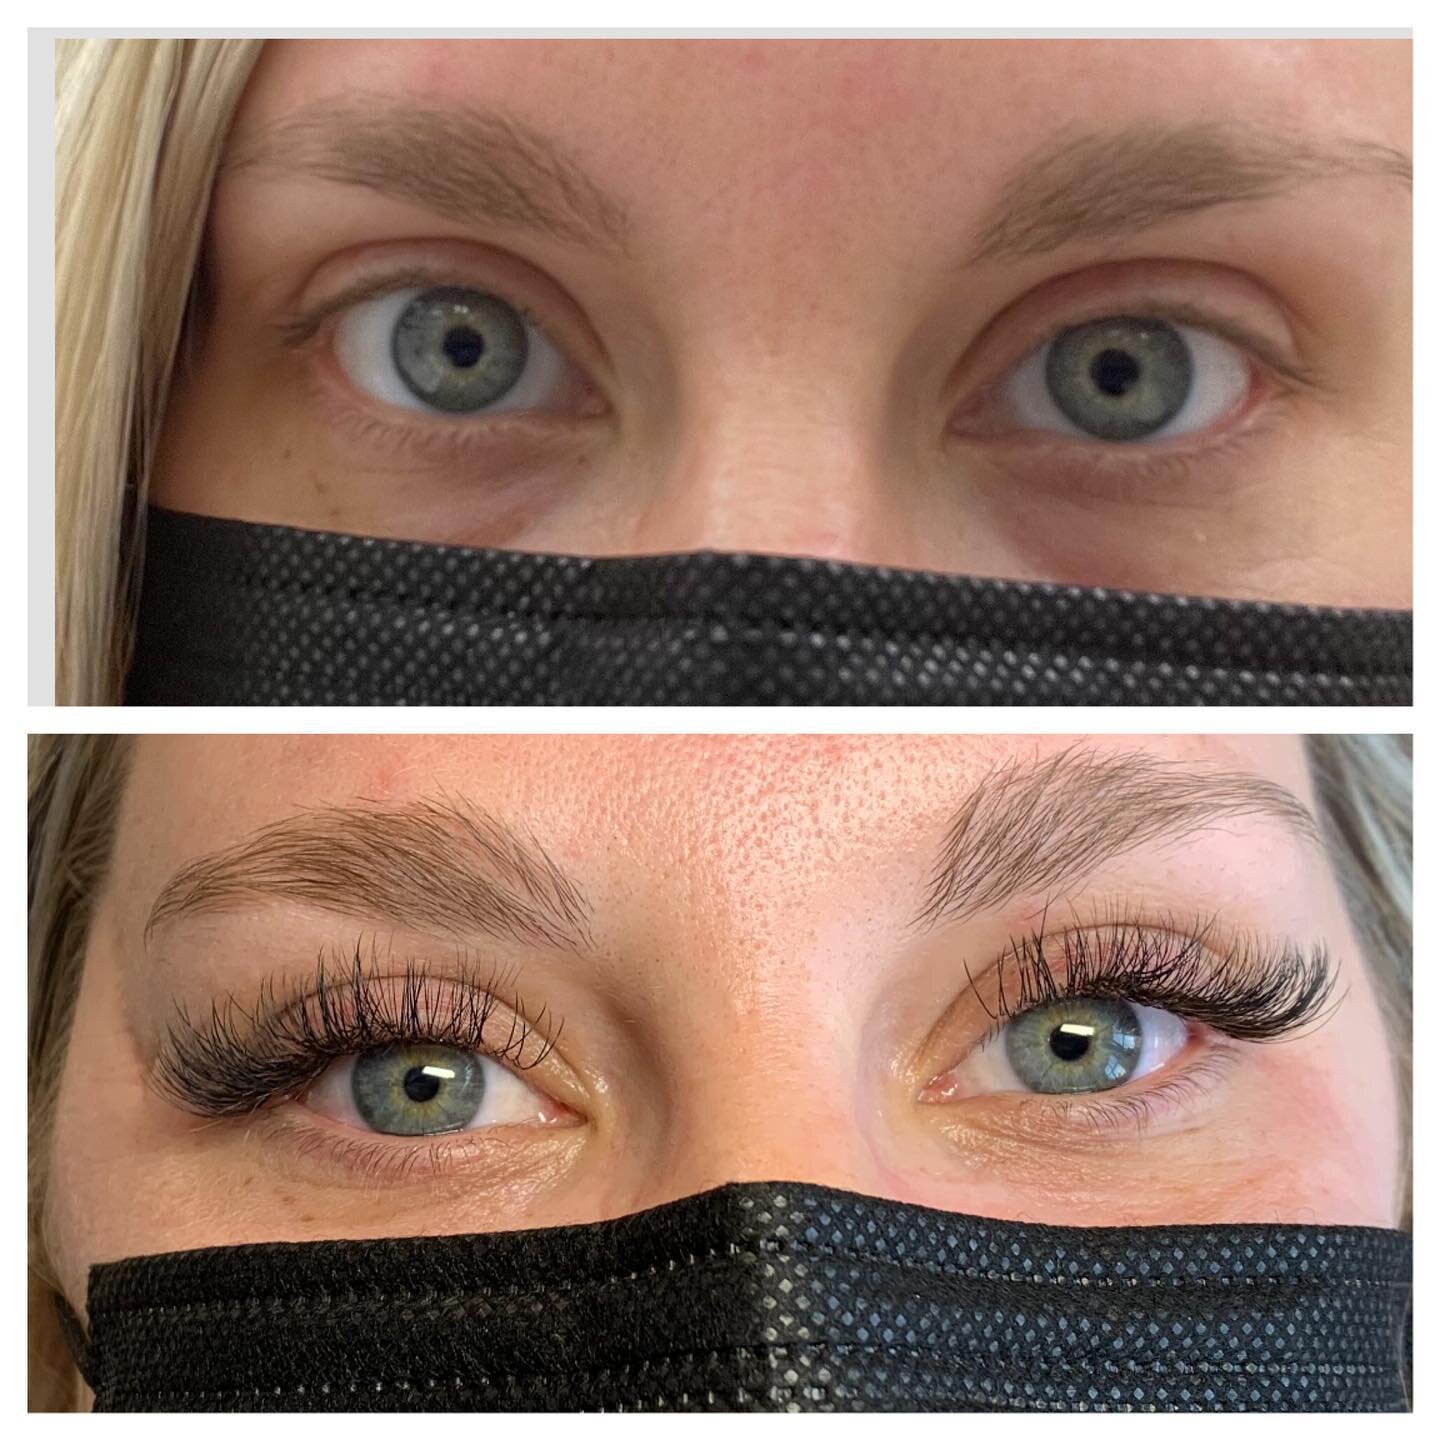 Notice her eyes are deep set &amp; round. The lashes brought her eyes forward &amp; the winged style made her eyes more almond shaped. 
&bull;
&bull;
&bull;
#eyes #lashes #lashesonfleek #hybridlashes #hybrid #lashextensions #lashartist #lash #dallasl